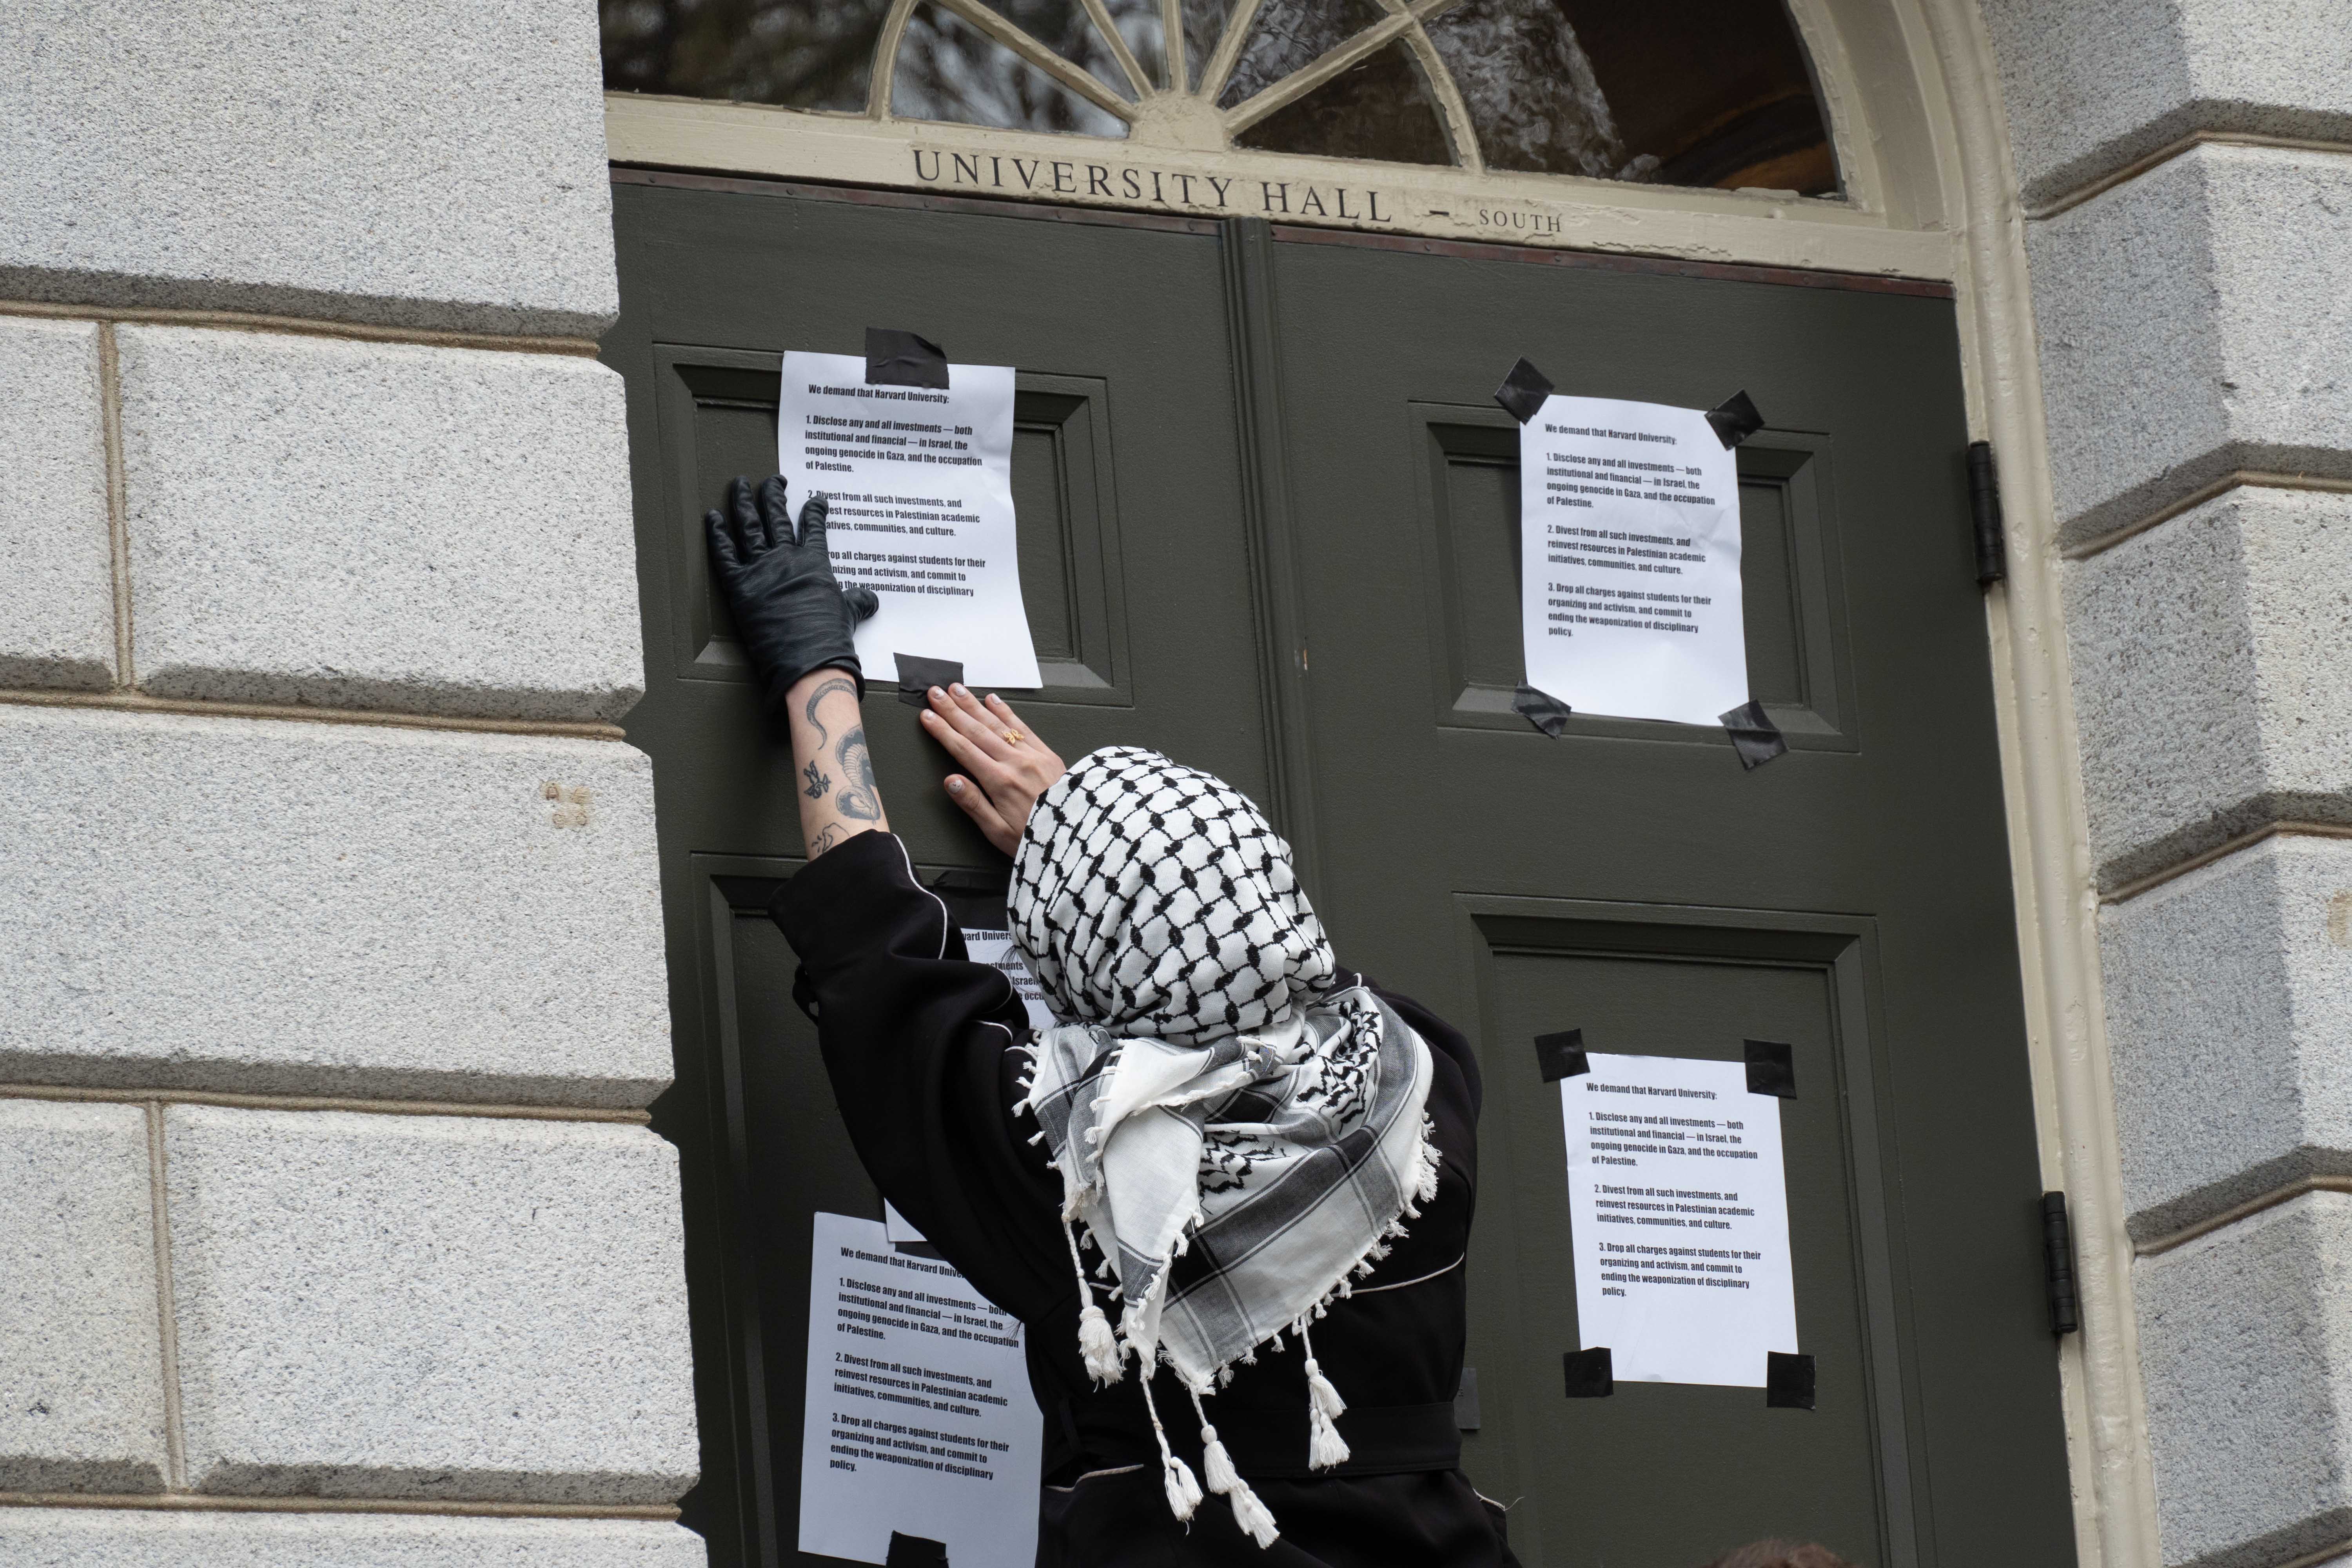 A protester tapes signs to the doors of University Hall listing the demands of Harvard Out of Occupied Palestine during a rally at the Harvard Yard encampment. More than 200 pro-Palestine demonstrators rallied for Rafah and criticized the repression of student activism at universities across the country at the protest.